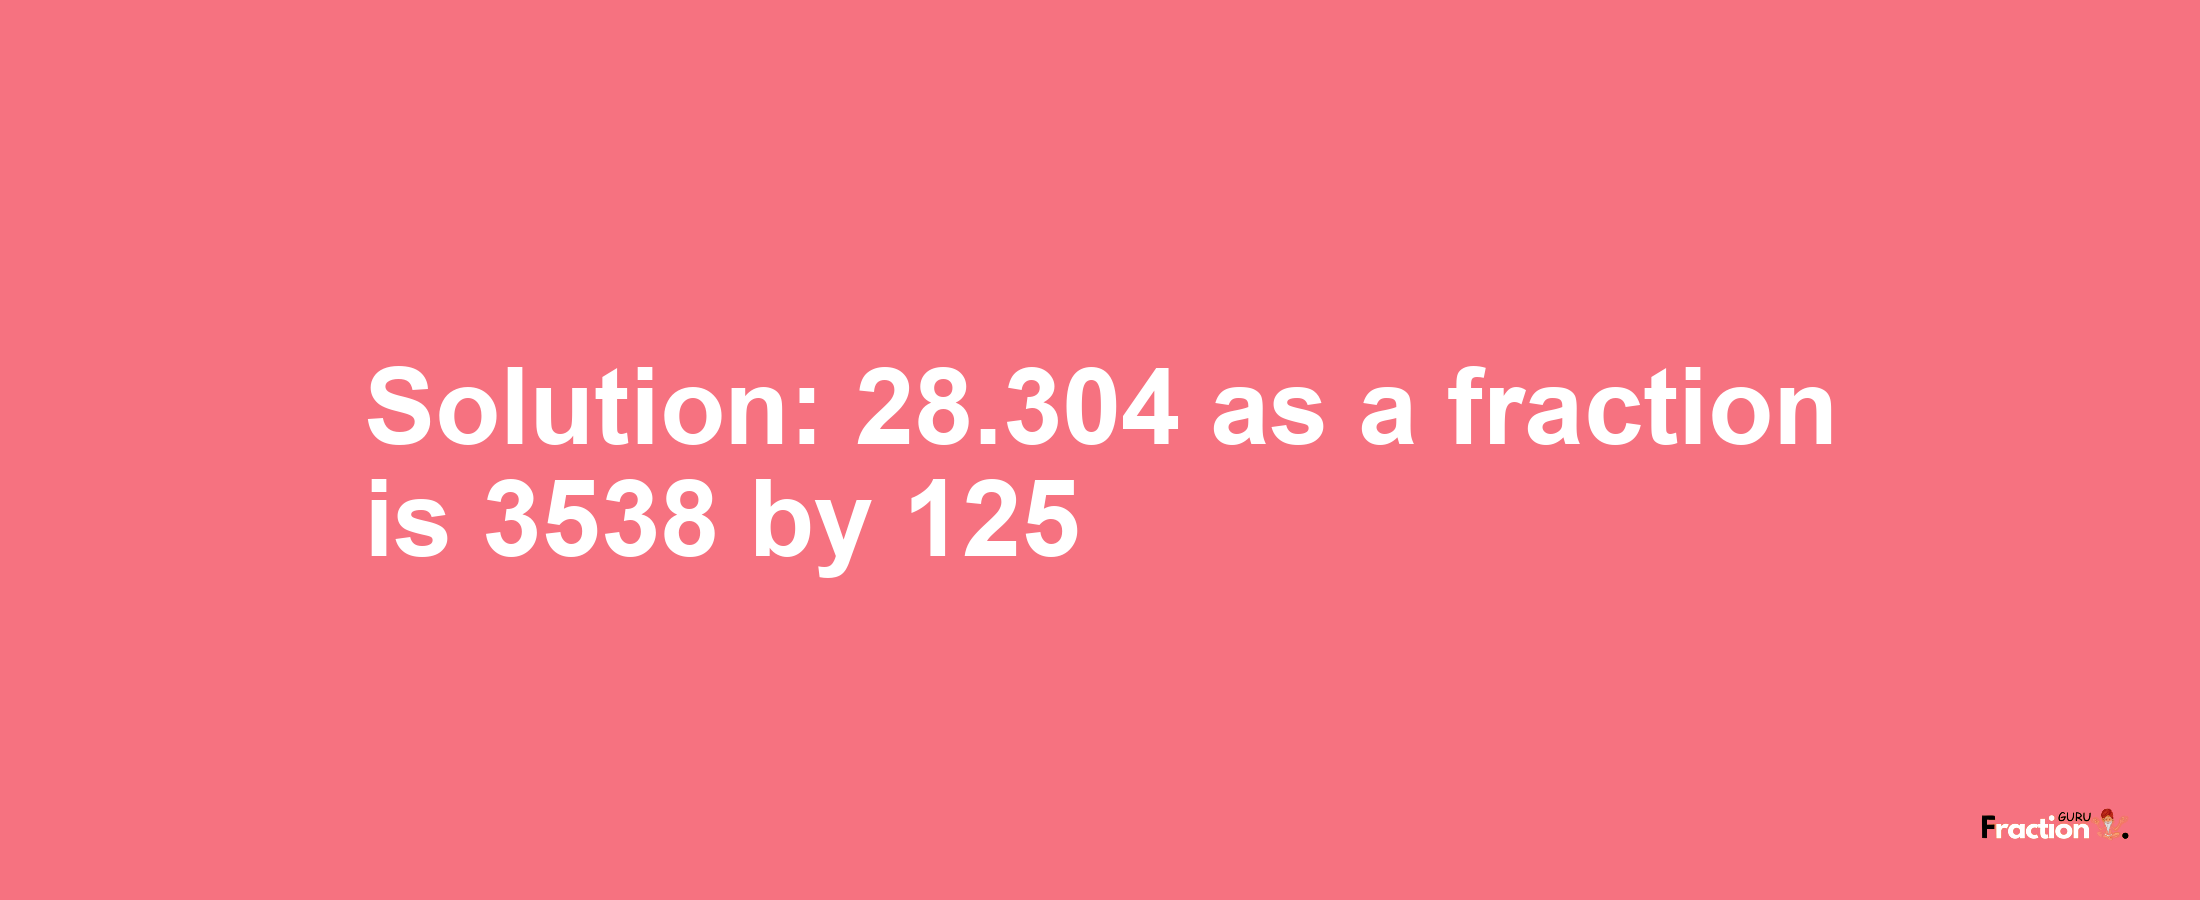 Solution:28.304 as a fraction is 3538/125